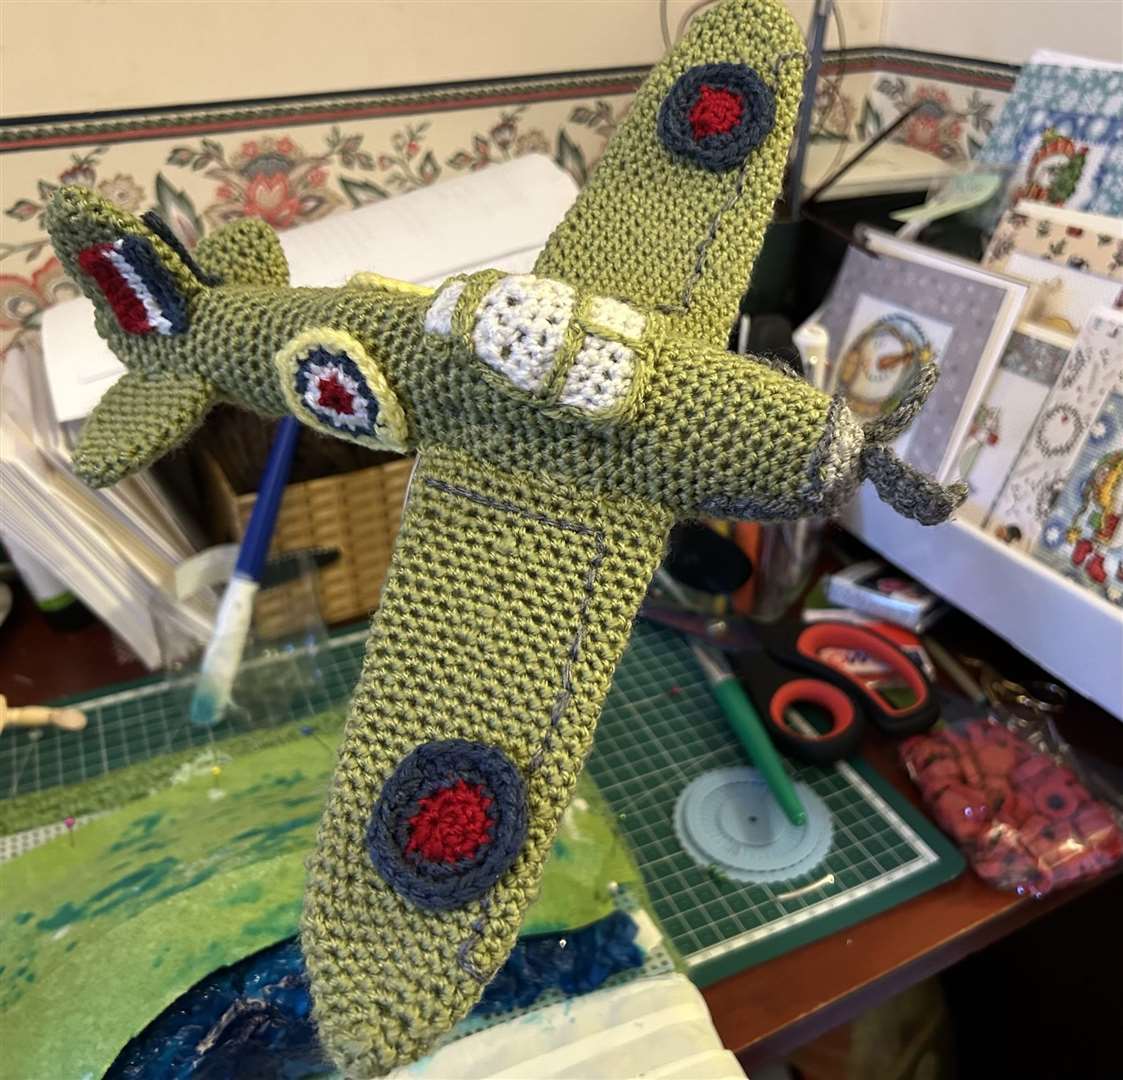 The Spitfire was the main part of the topper (Caroline Lord/PA)